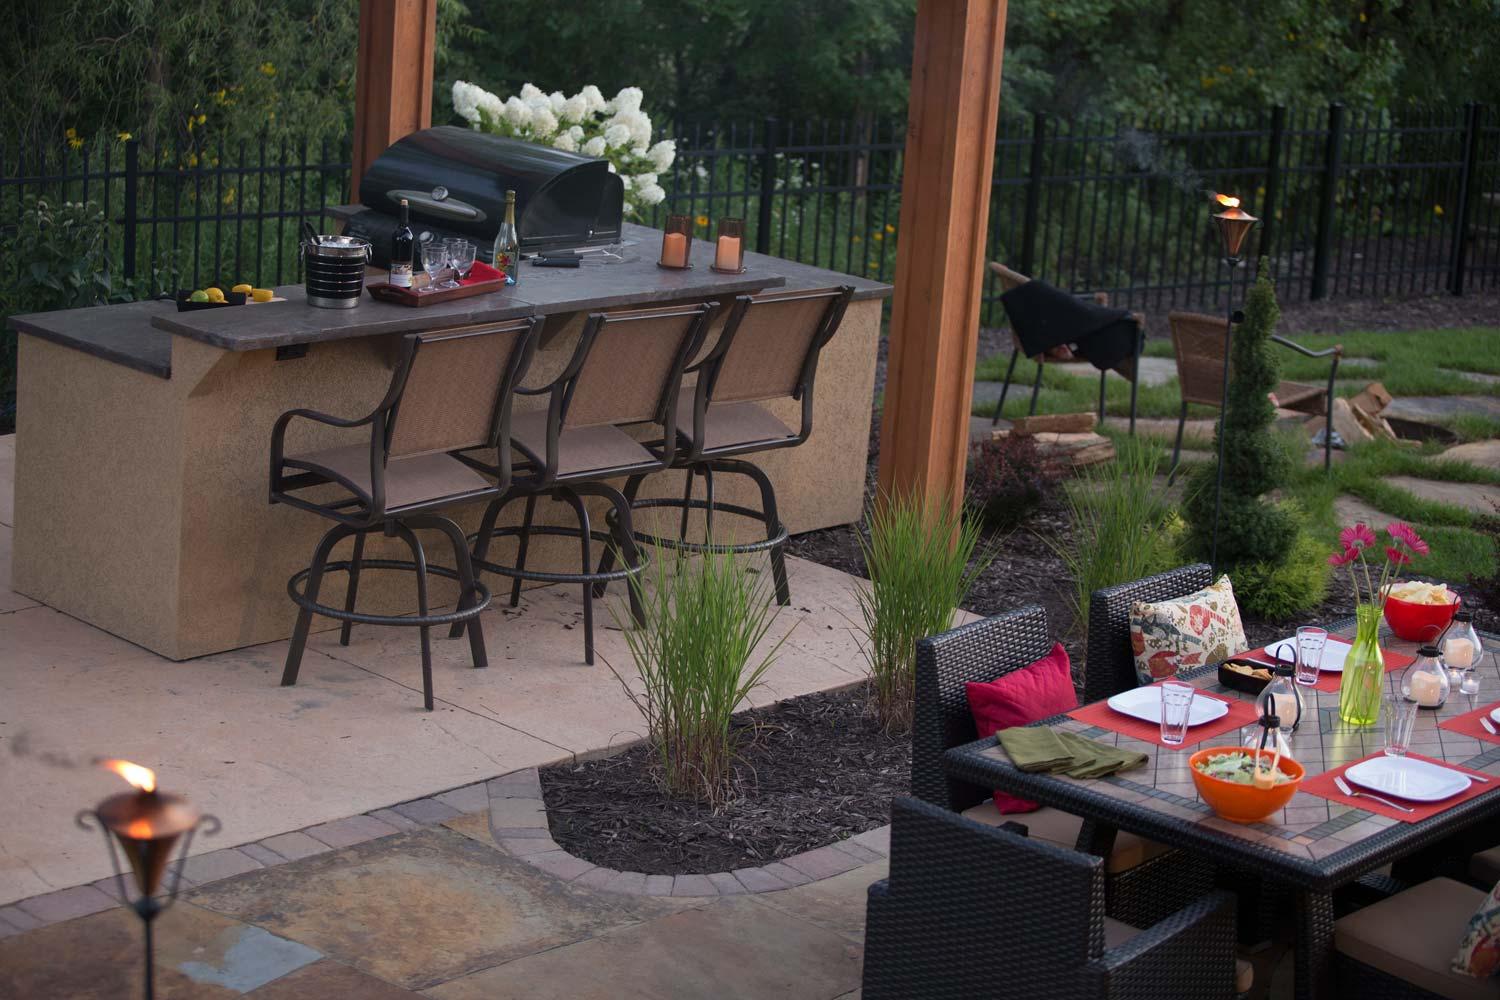 dining patio separated from outdoor pergola bar by tall grass plantings